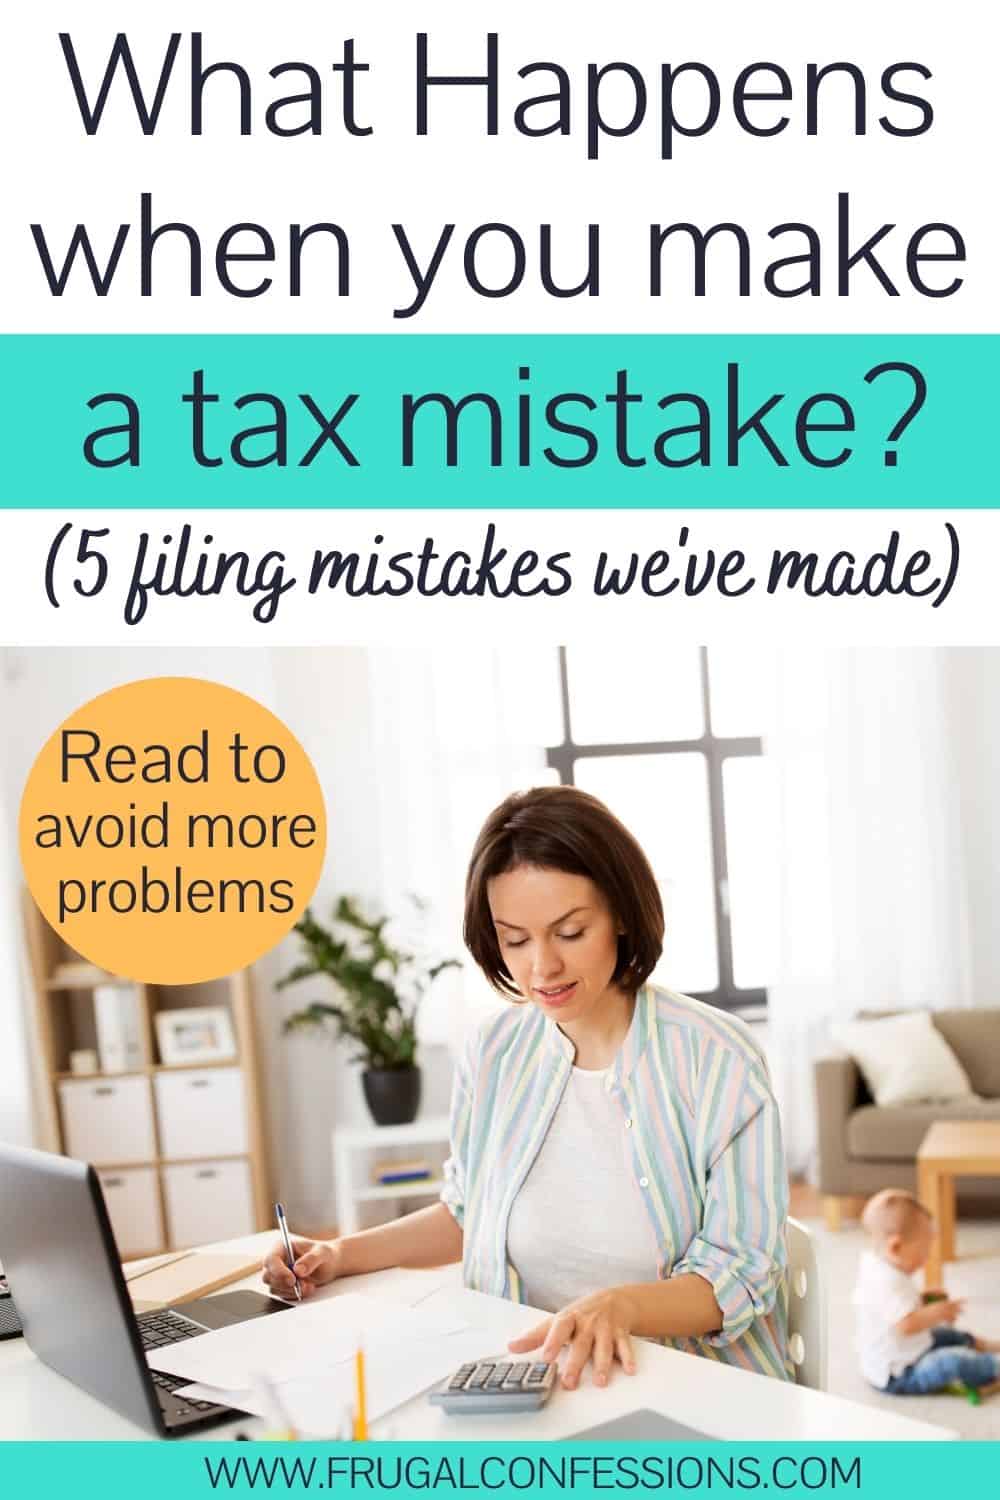 woman at desk working on taxes, text overlay "what happens when you make a tax mistake - 5 filing mistakes we've made"